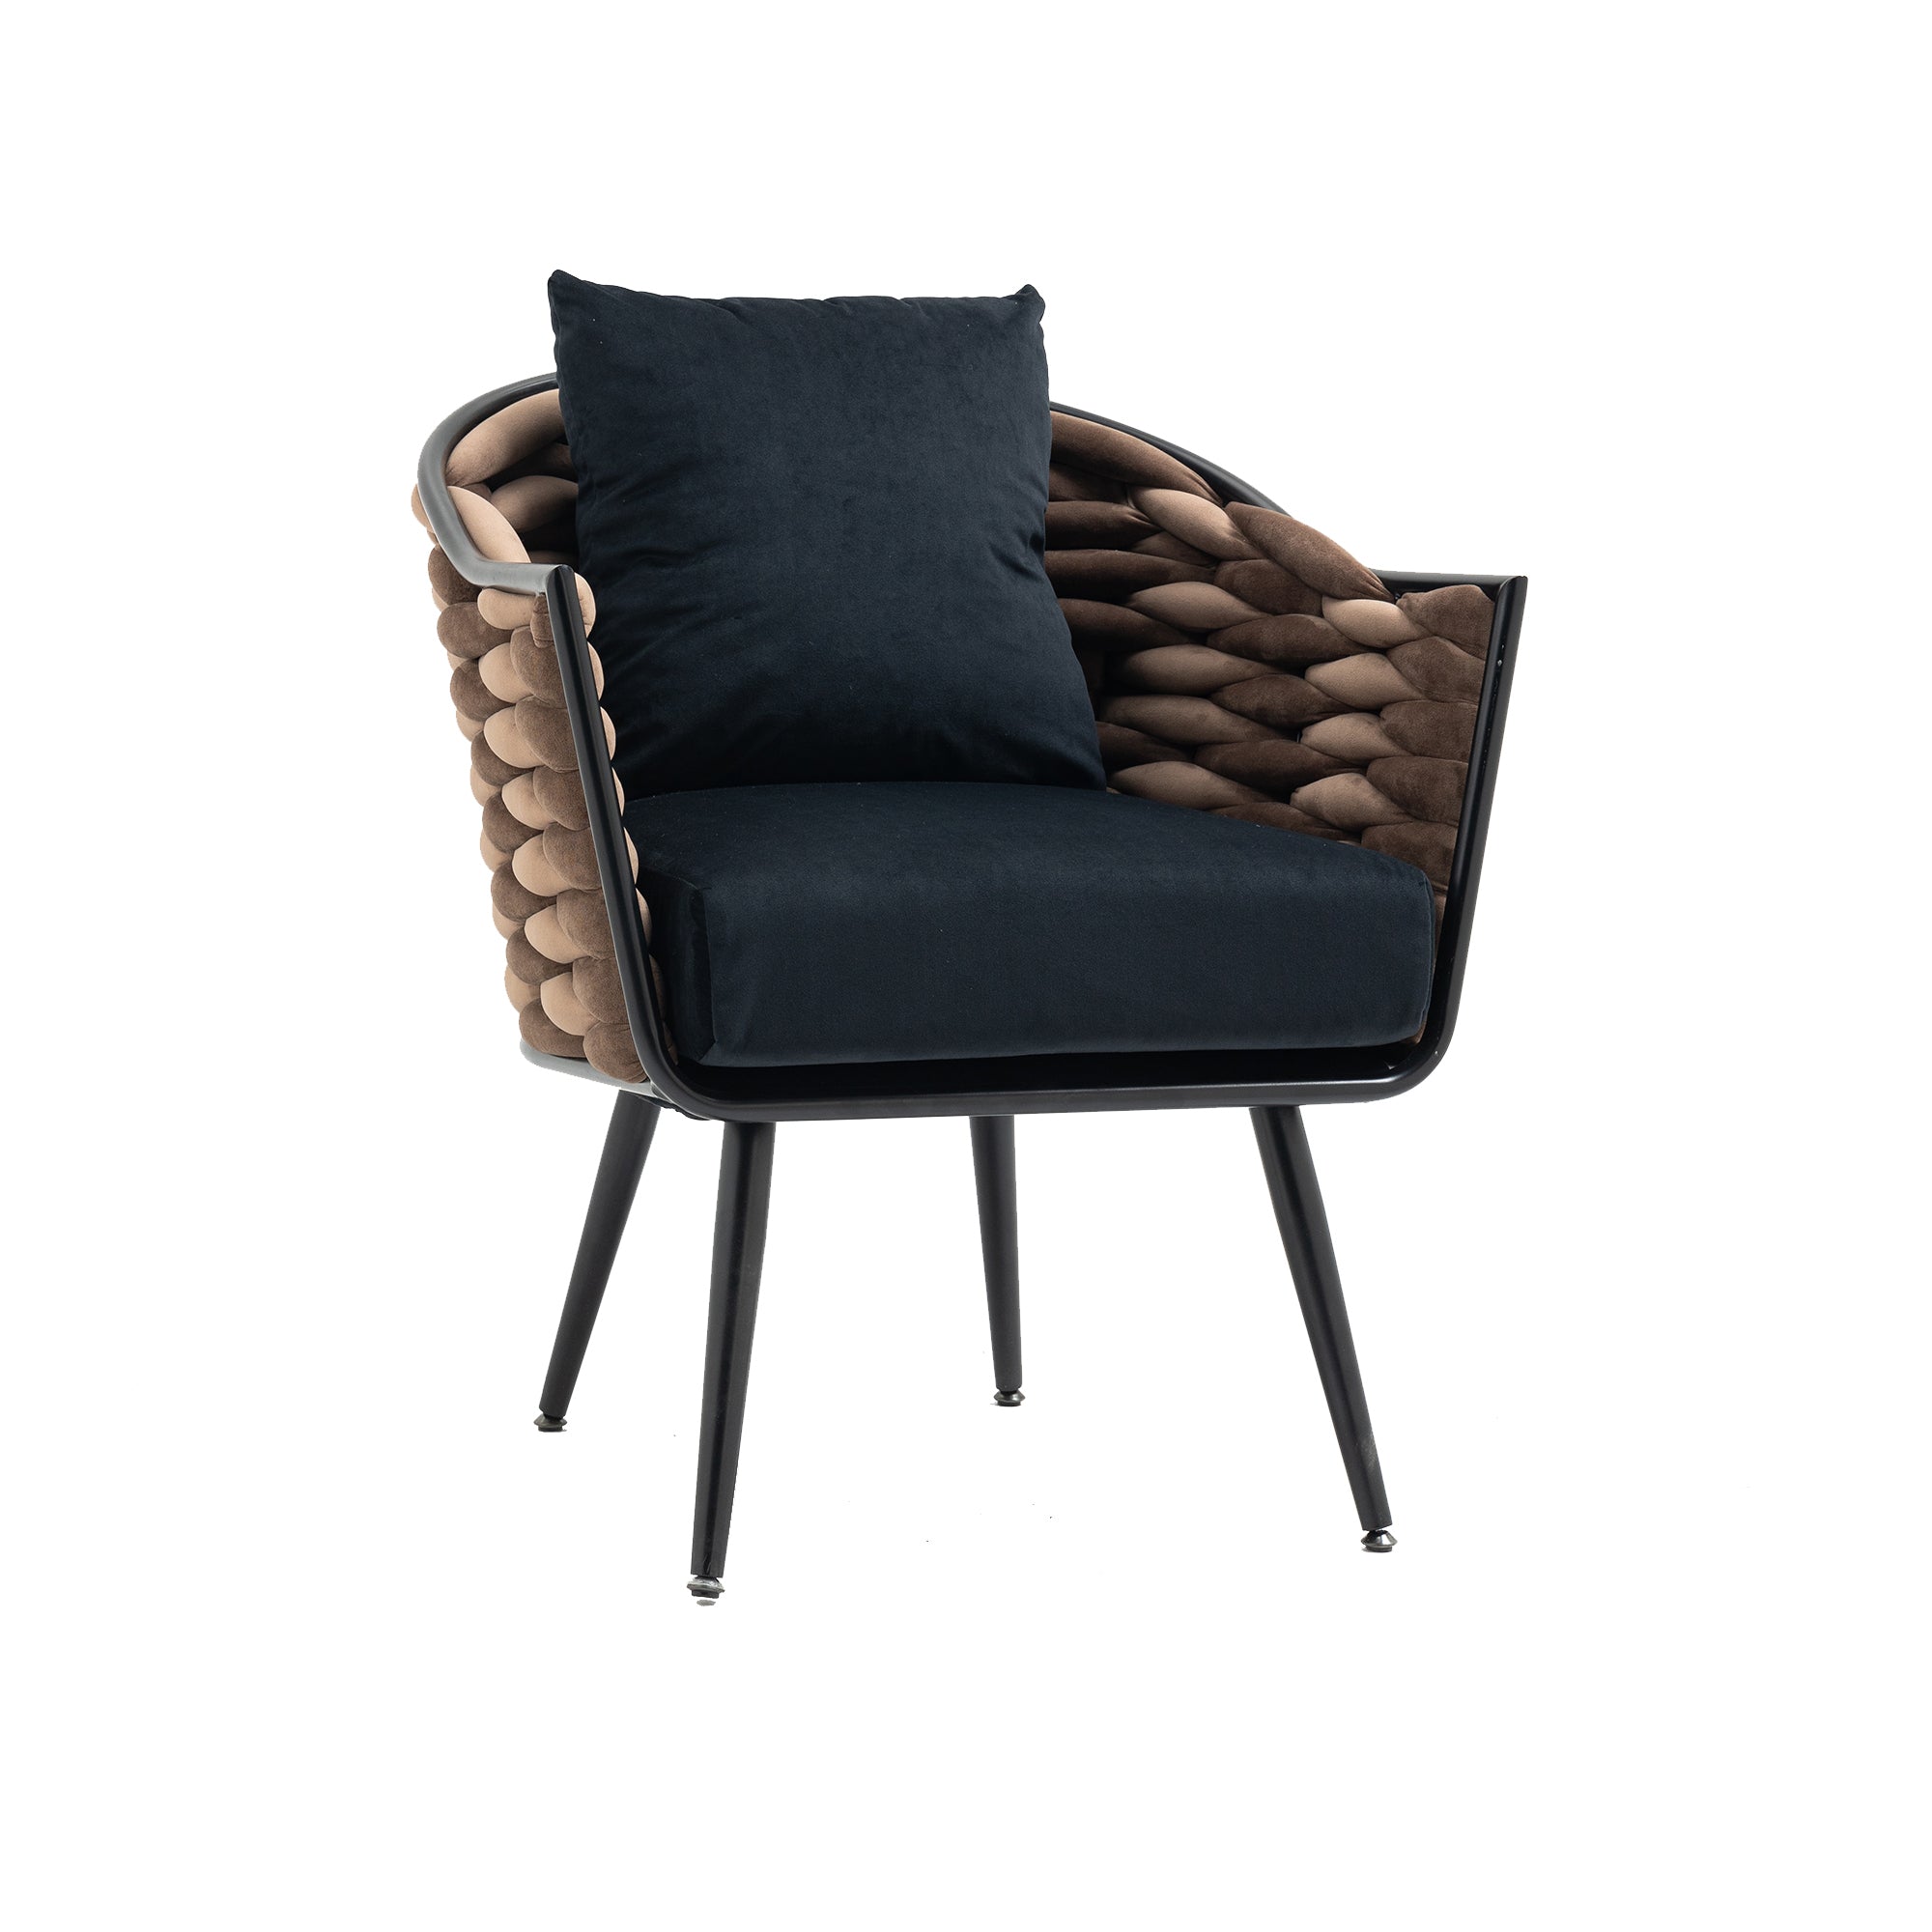 Velvet Accent Chair Upholstered Armchair Tufted with Metal Frame - Black